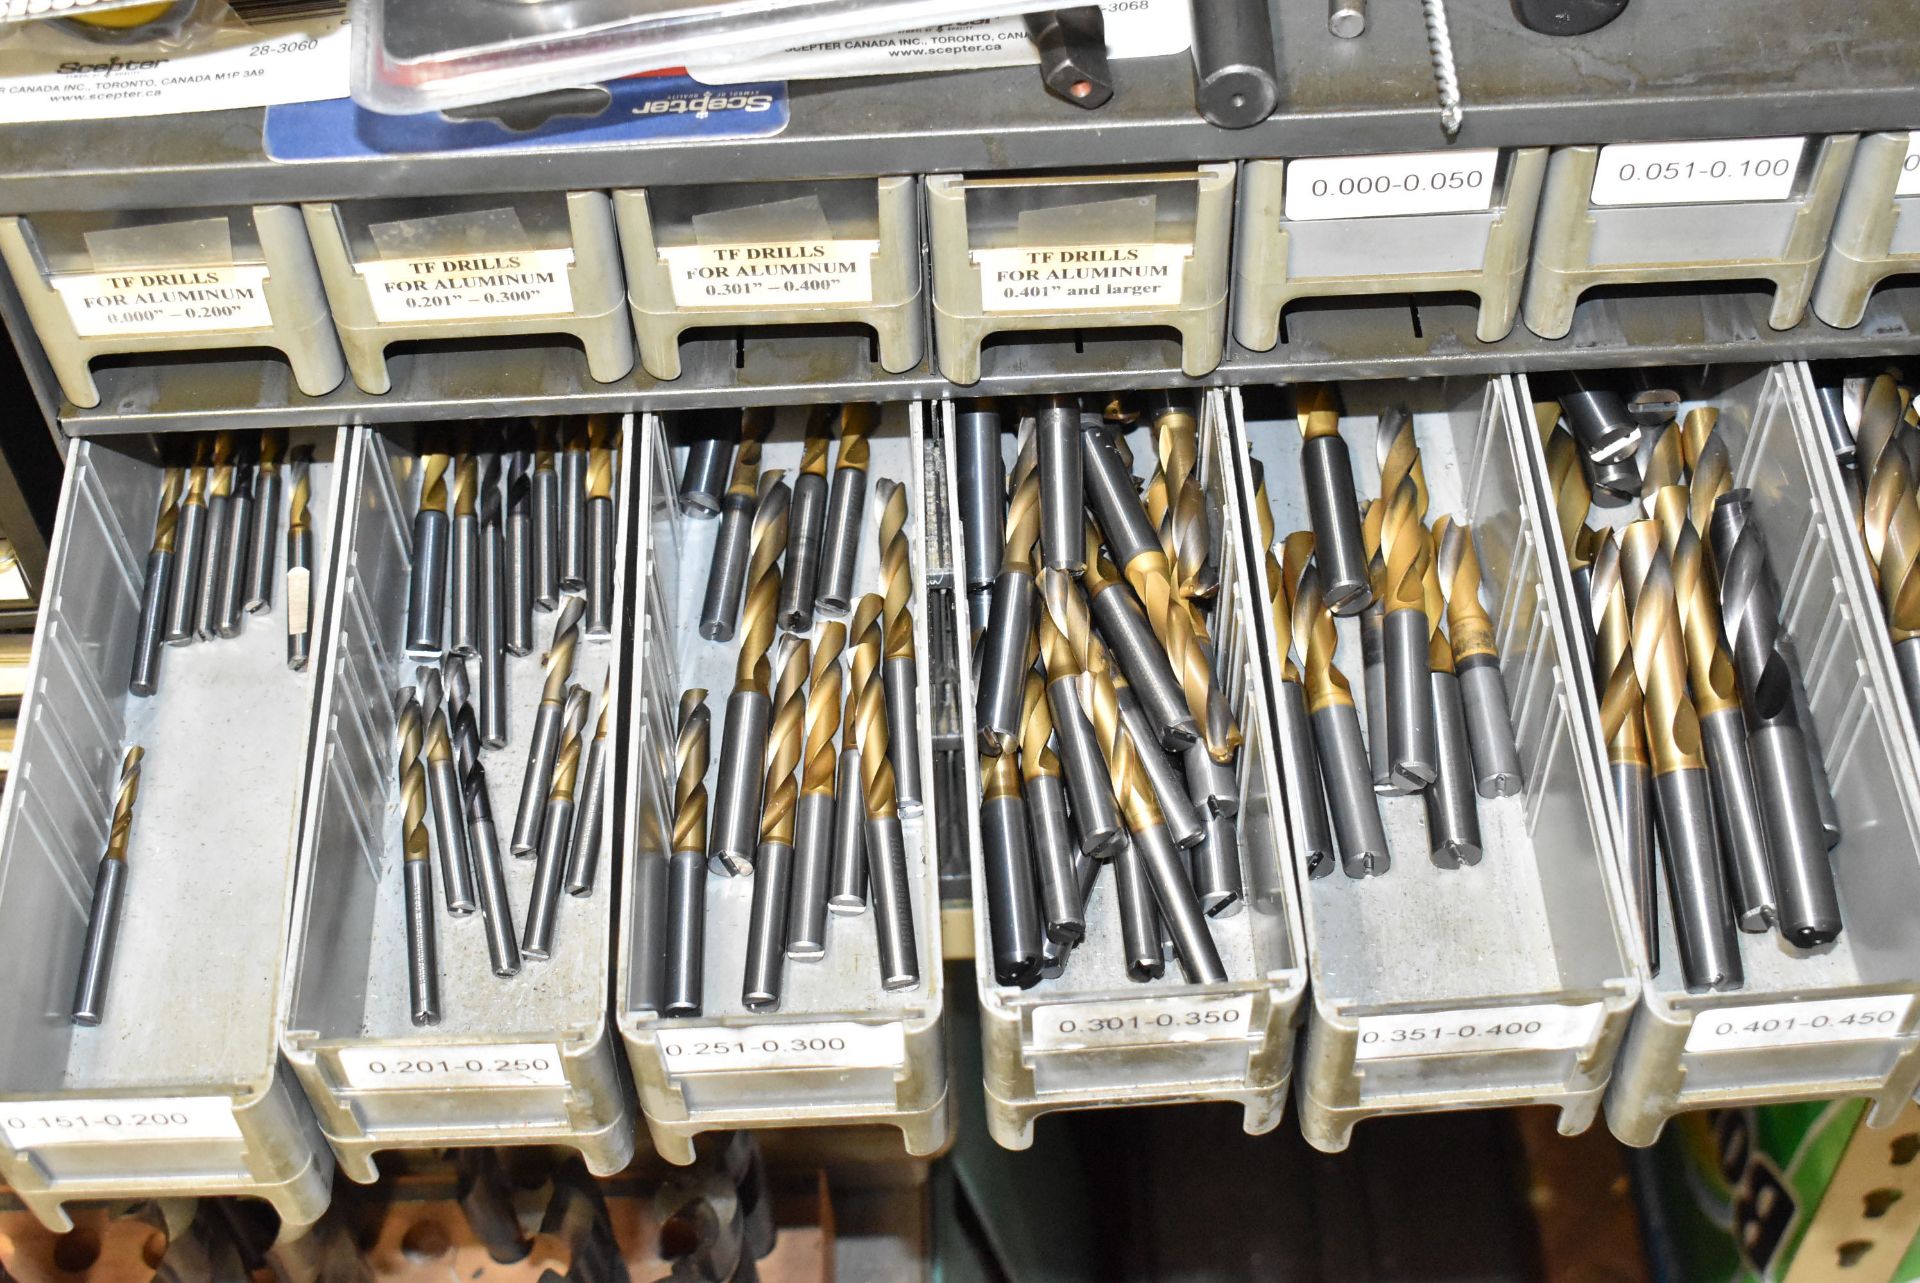 LOT/ (1) SHELVING SECTION WITH CONTENTS CONSISTING OF DRILLS, REAMERS, CUTTING TOOLS, PARTS AND - Image 11 of 13